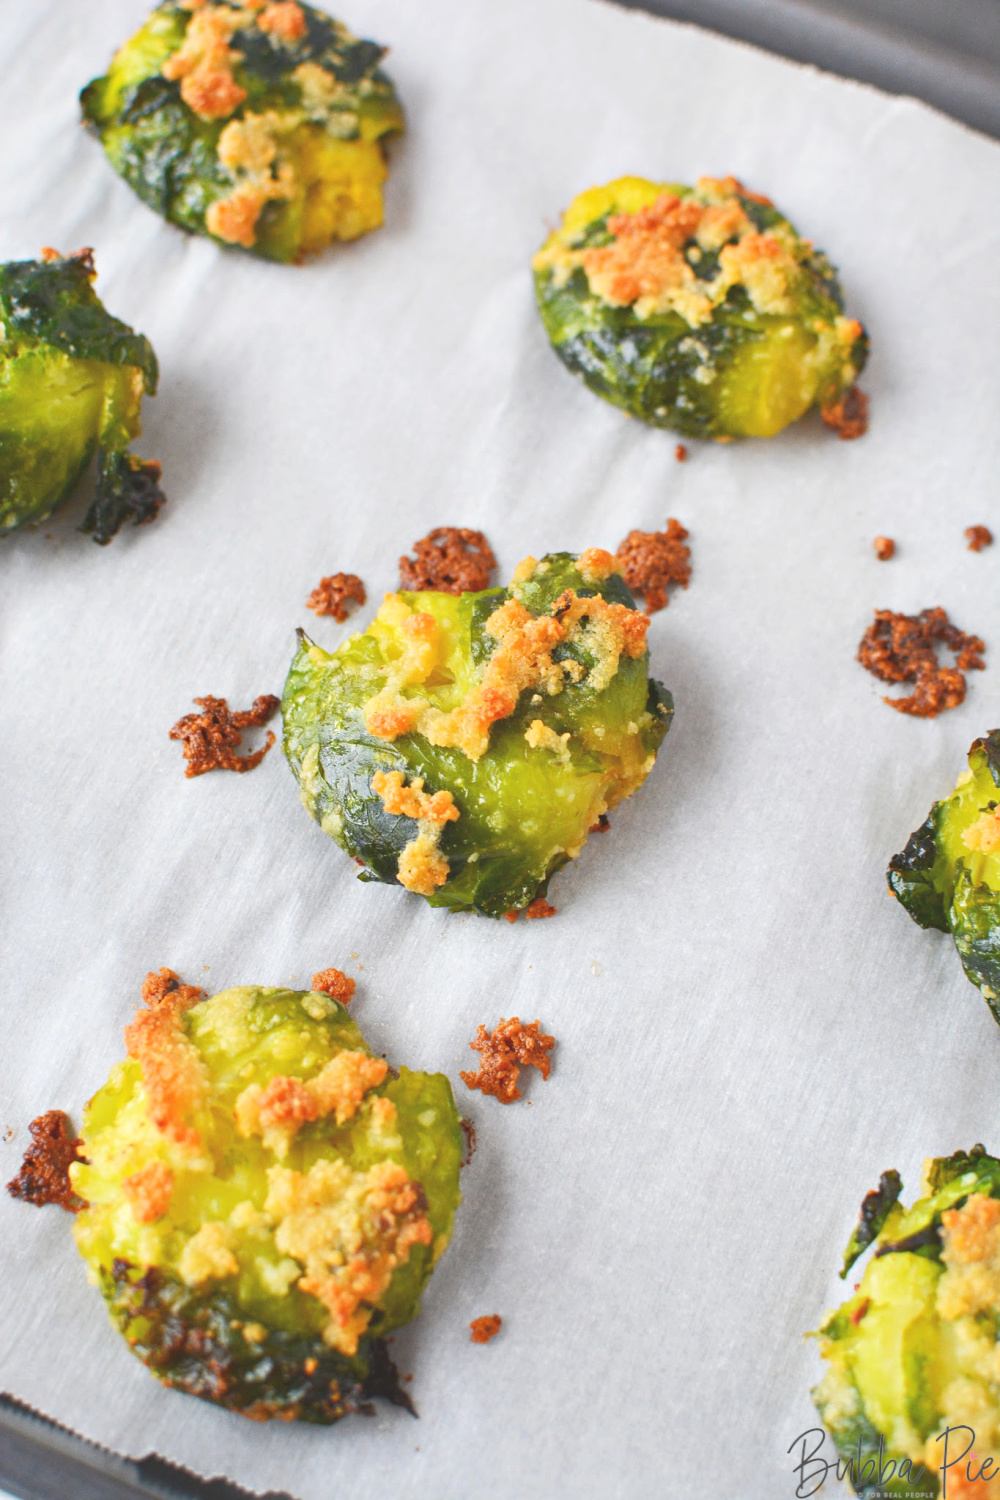 How To Make Smashed Brussels Sprouts